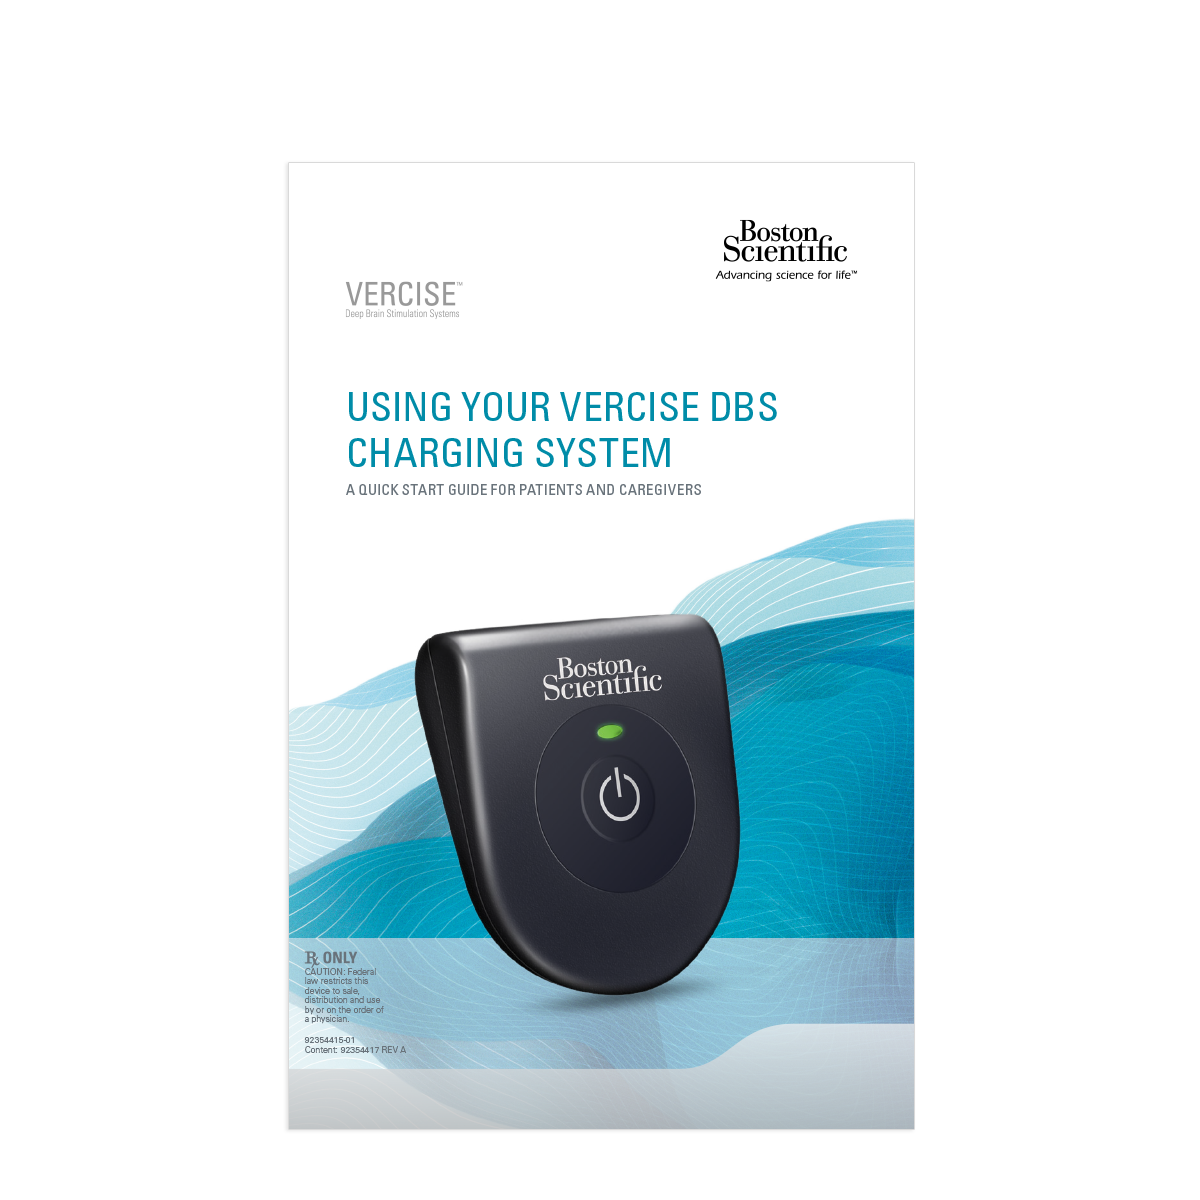 Using Your Vercise Charging System brochure